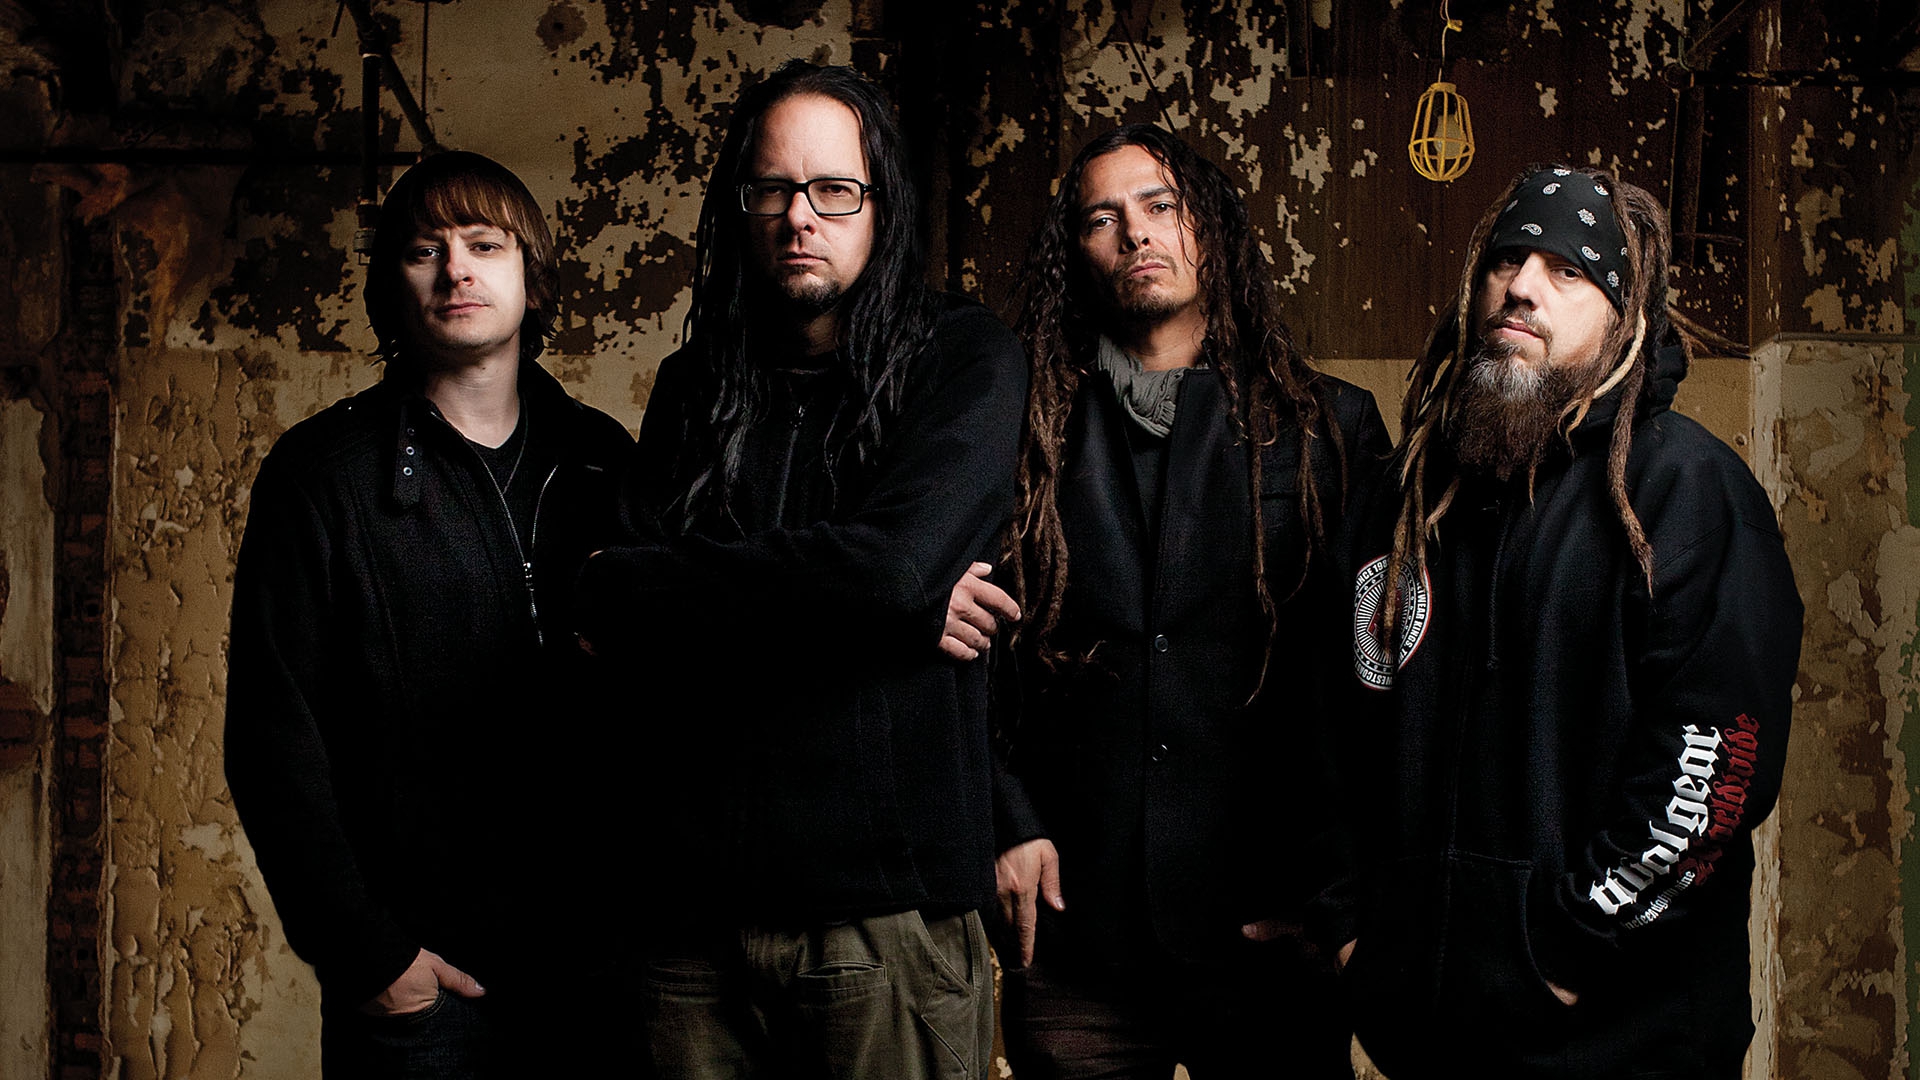 Korn Wallpaper Image Photos Pictures Background